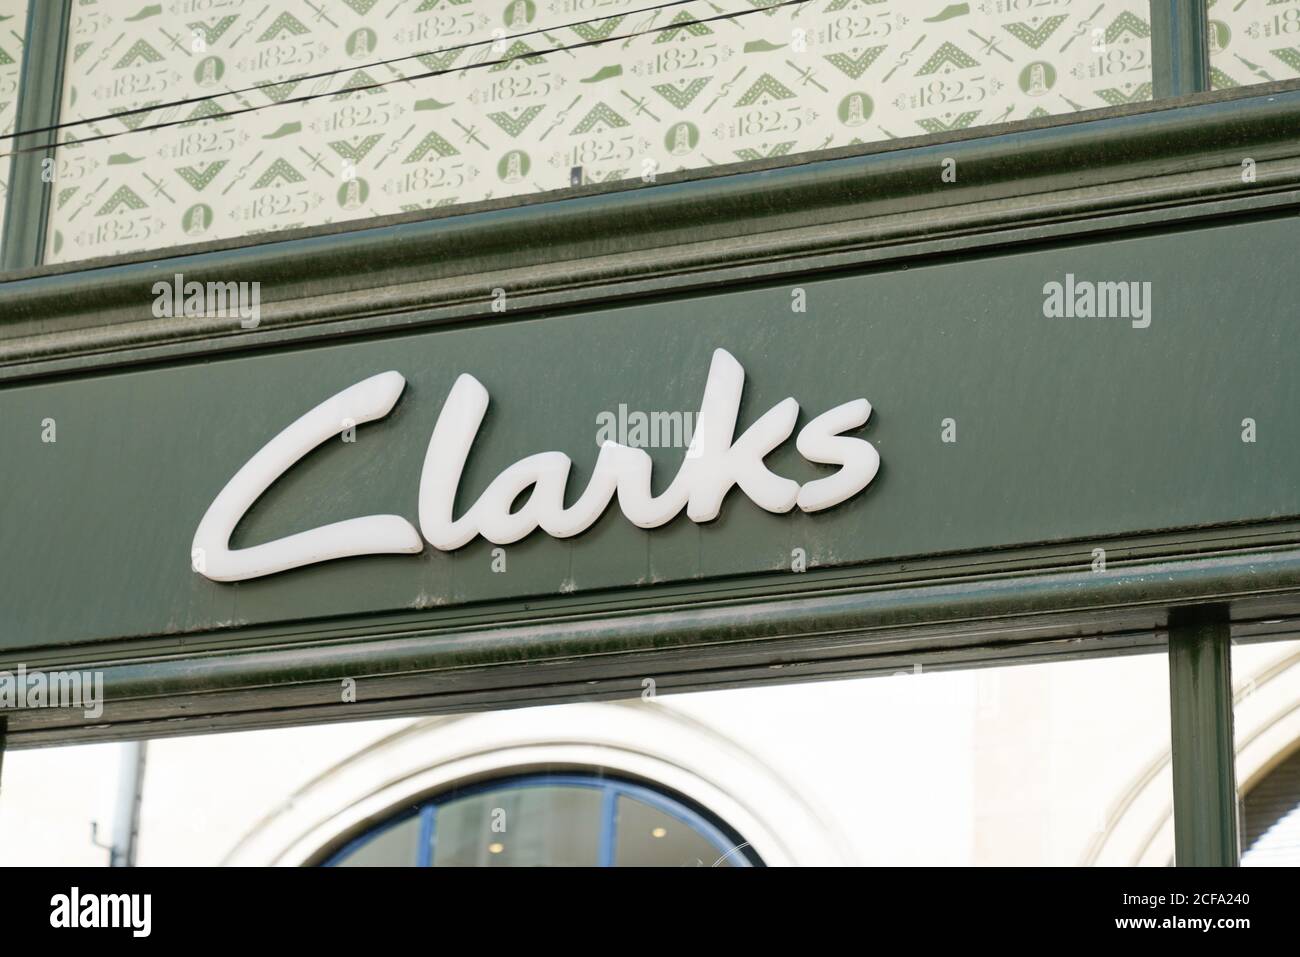 Bordeaux , Aquitaine / France - 08 08 2020 : Clarks logo sign front of  Store shoes of international shoe manufacturer based in Somerset uk England  Stock Photo - Alamy